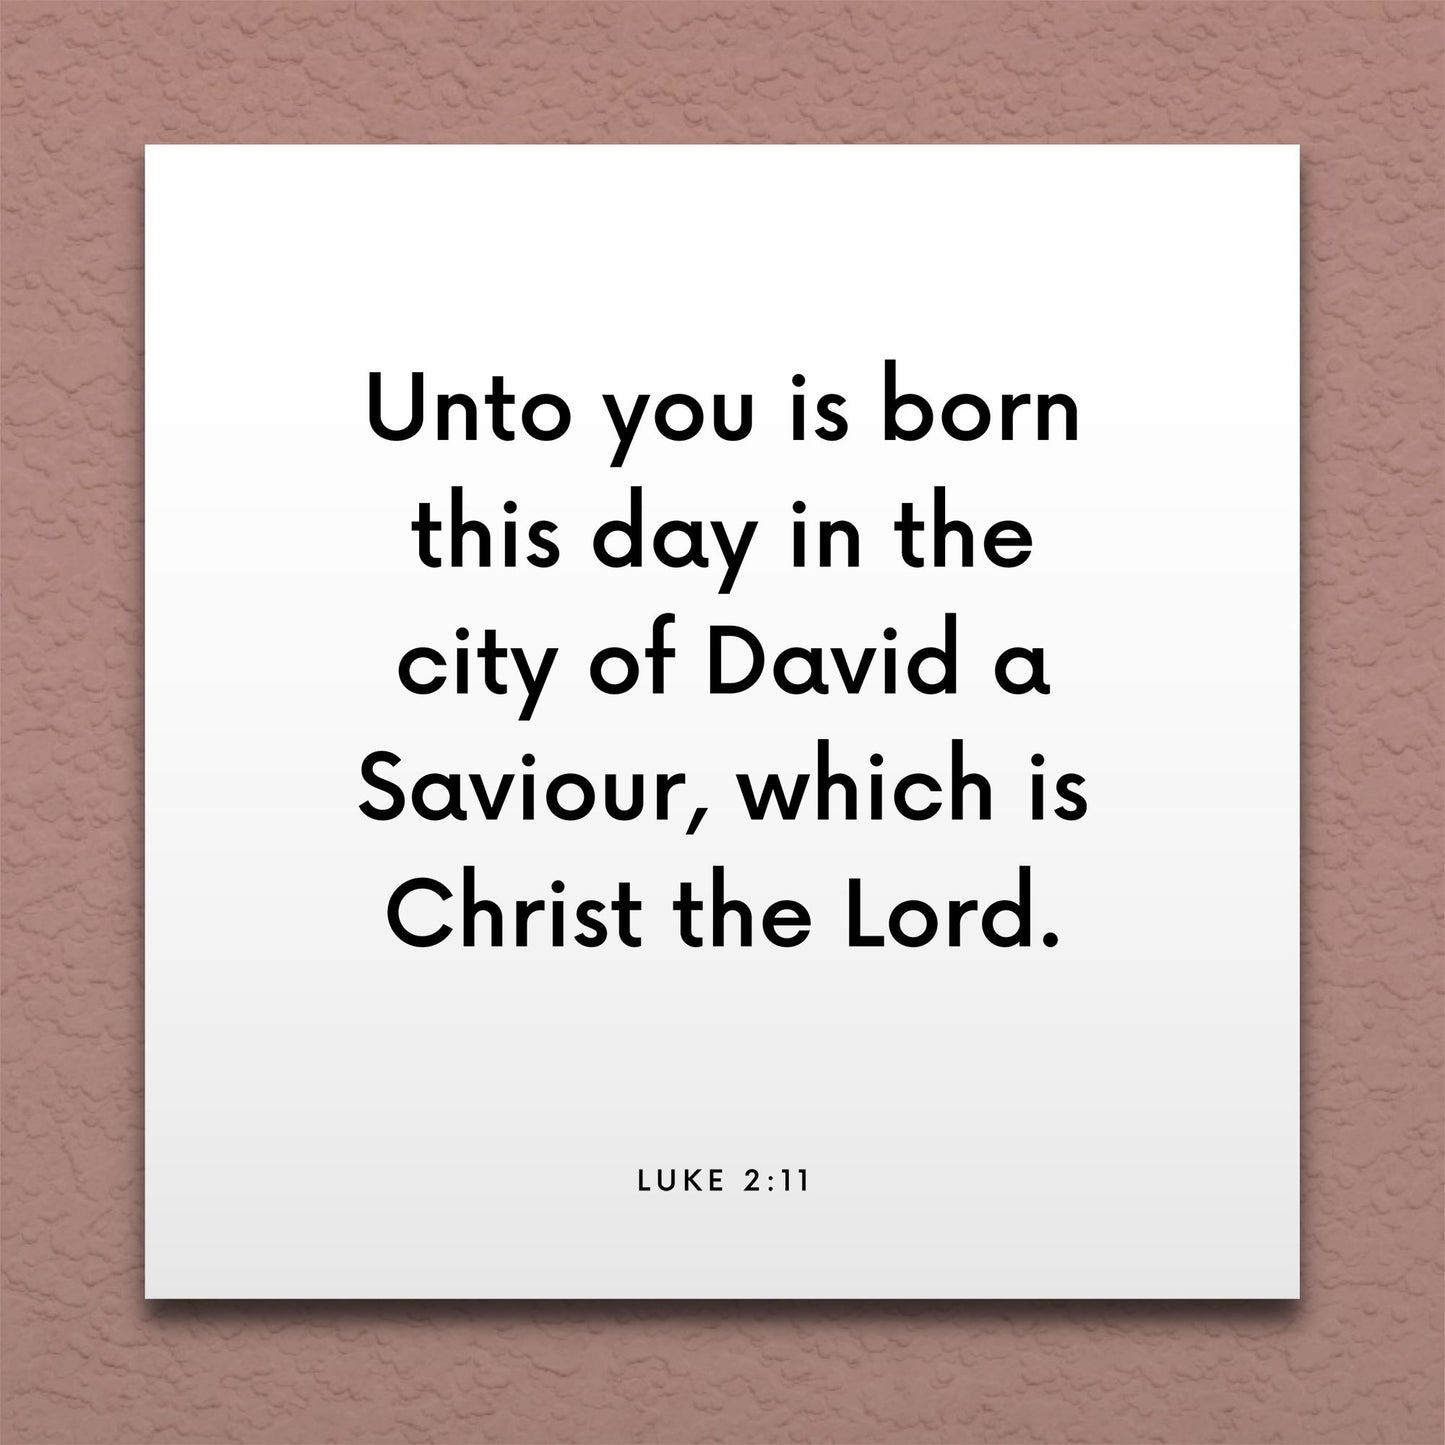 Wall-mounted scripture tile for Luke 2:11 - "Unto you is born this day in the city of David a Saviour"